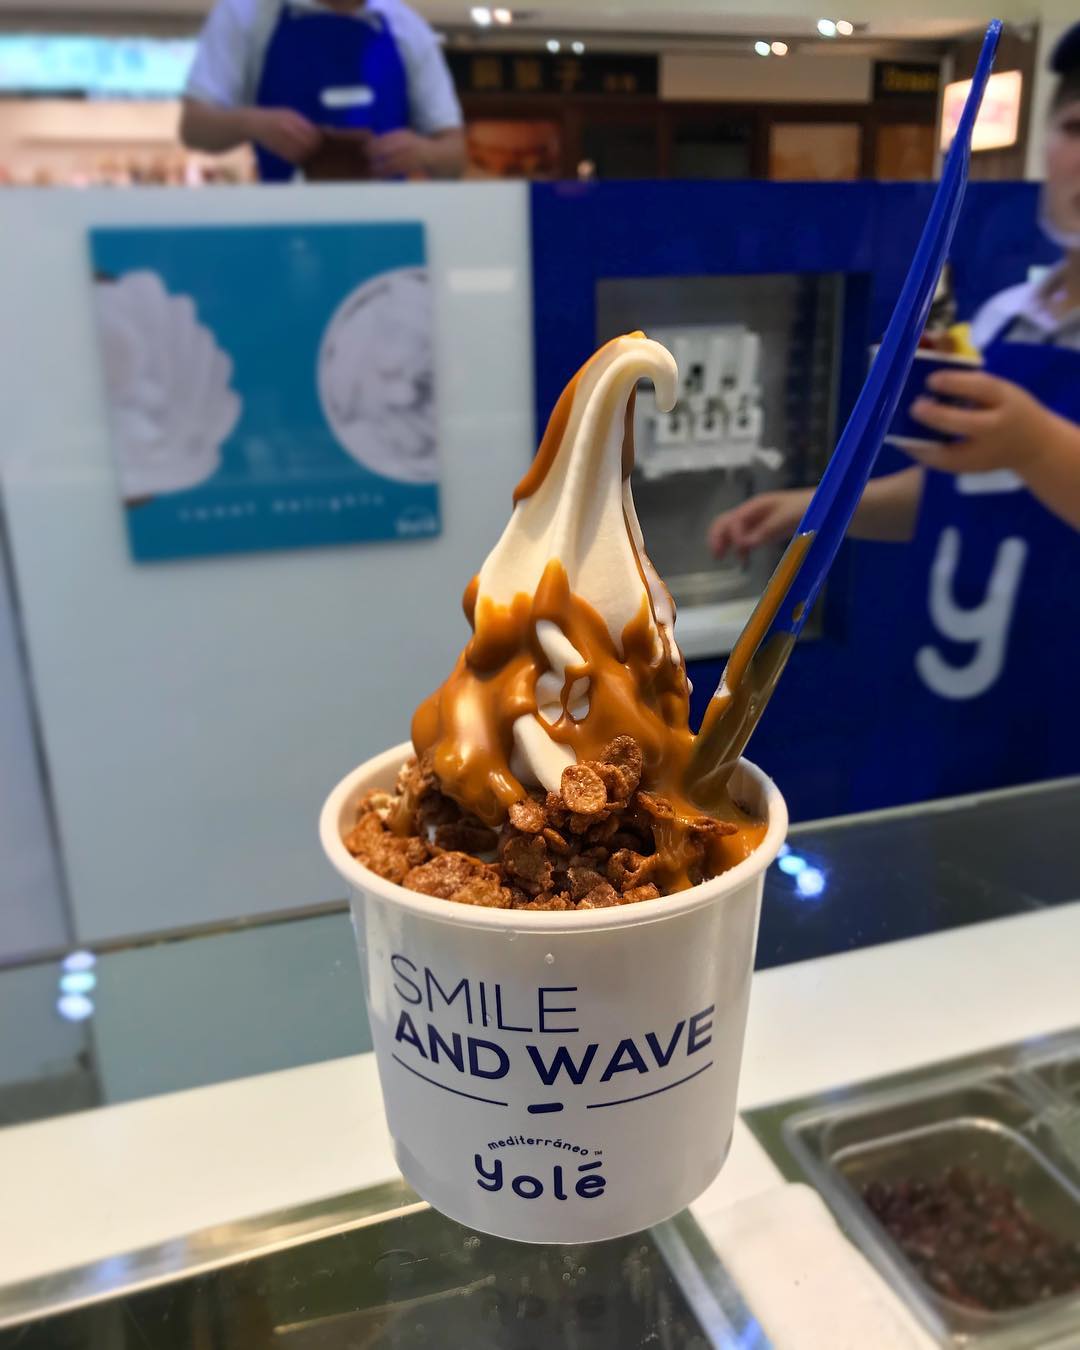 Singapore Will Be Closing All llaollao Outlets And Replacing Them with New Chain, Yole - WORLD OF BUZZ 3